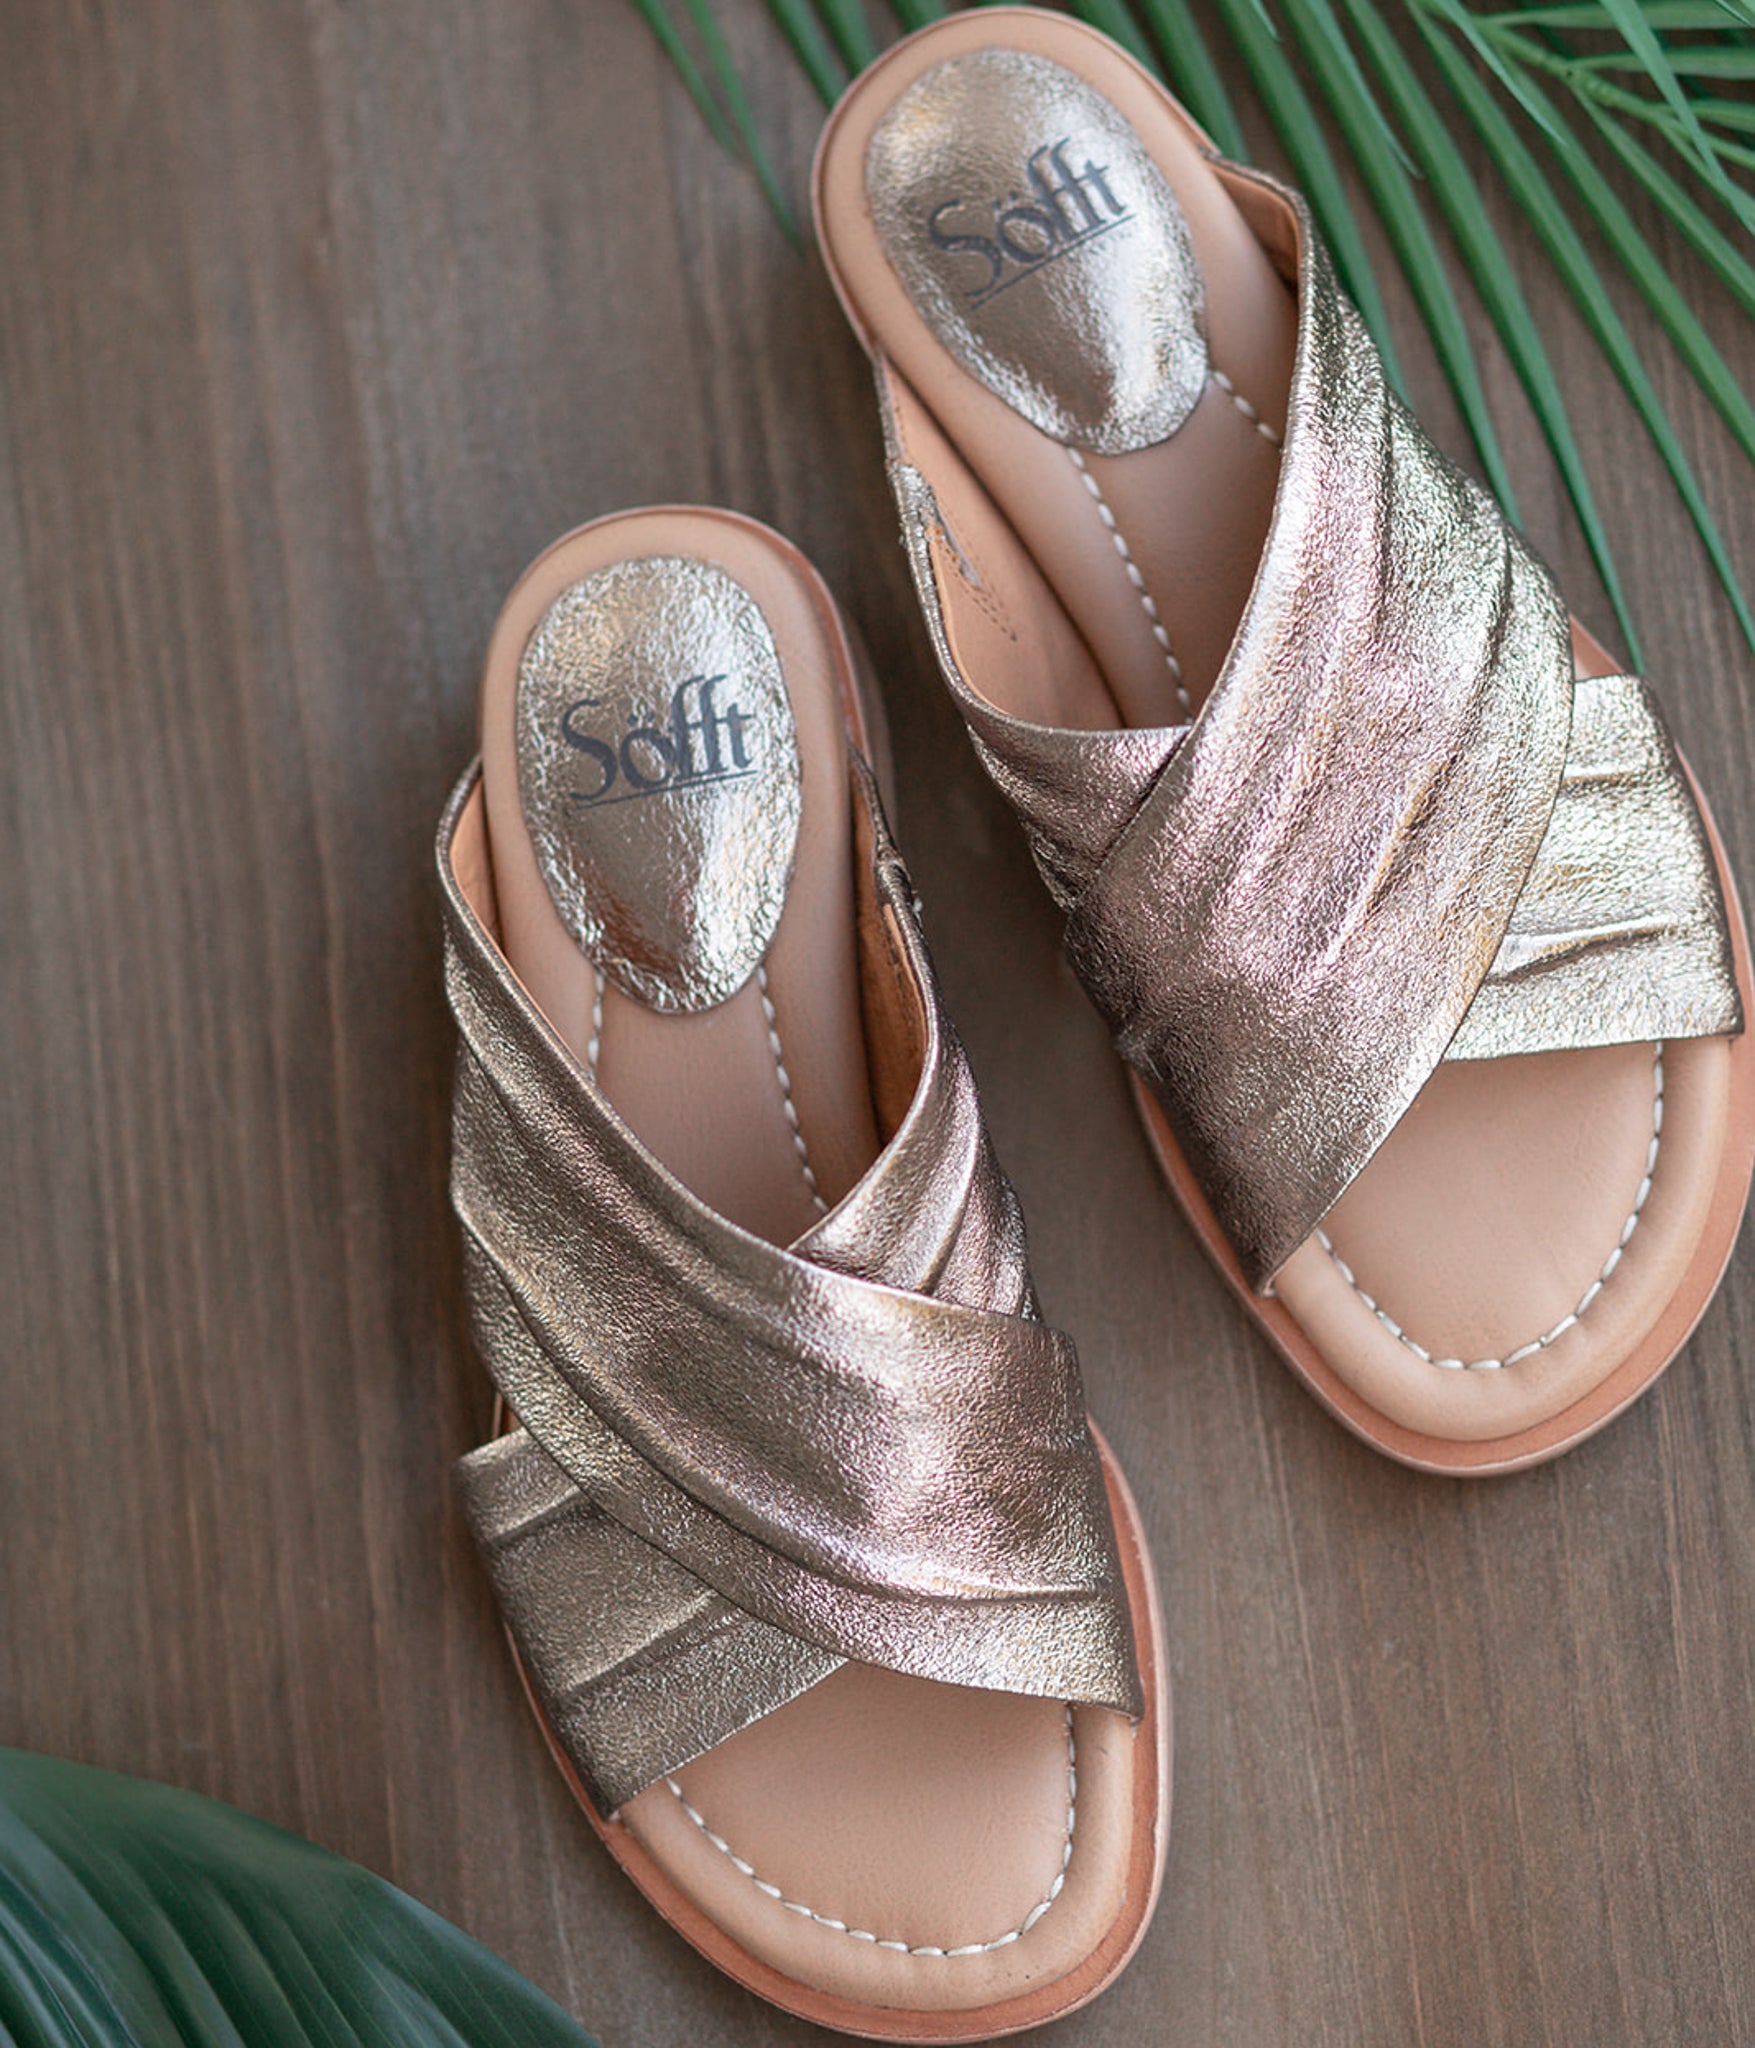 Fallon Leather Slide Sandal in Bronze by Sofft Shoes